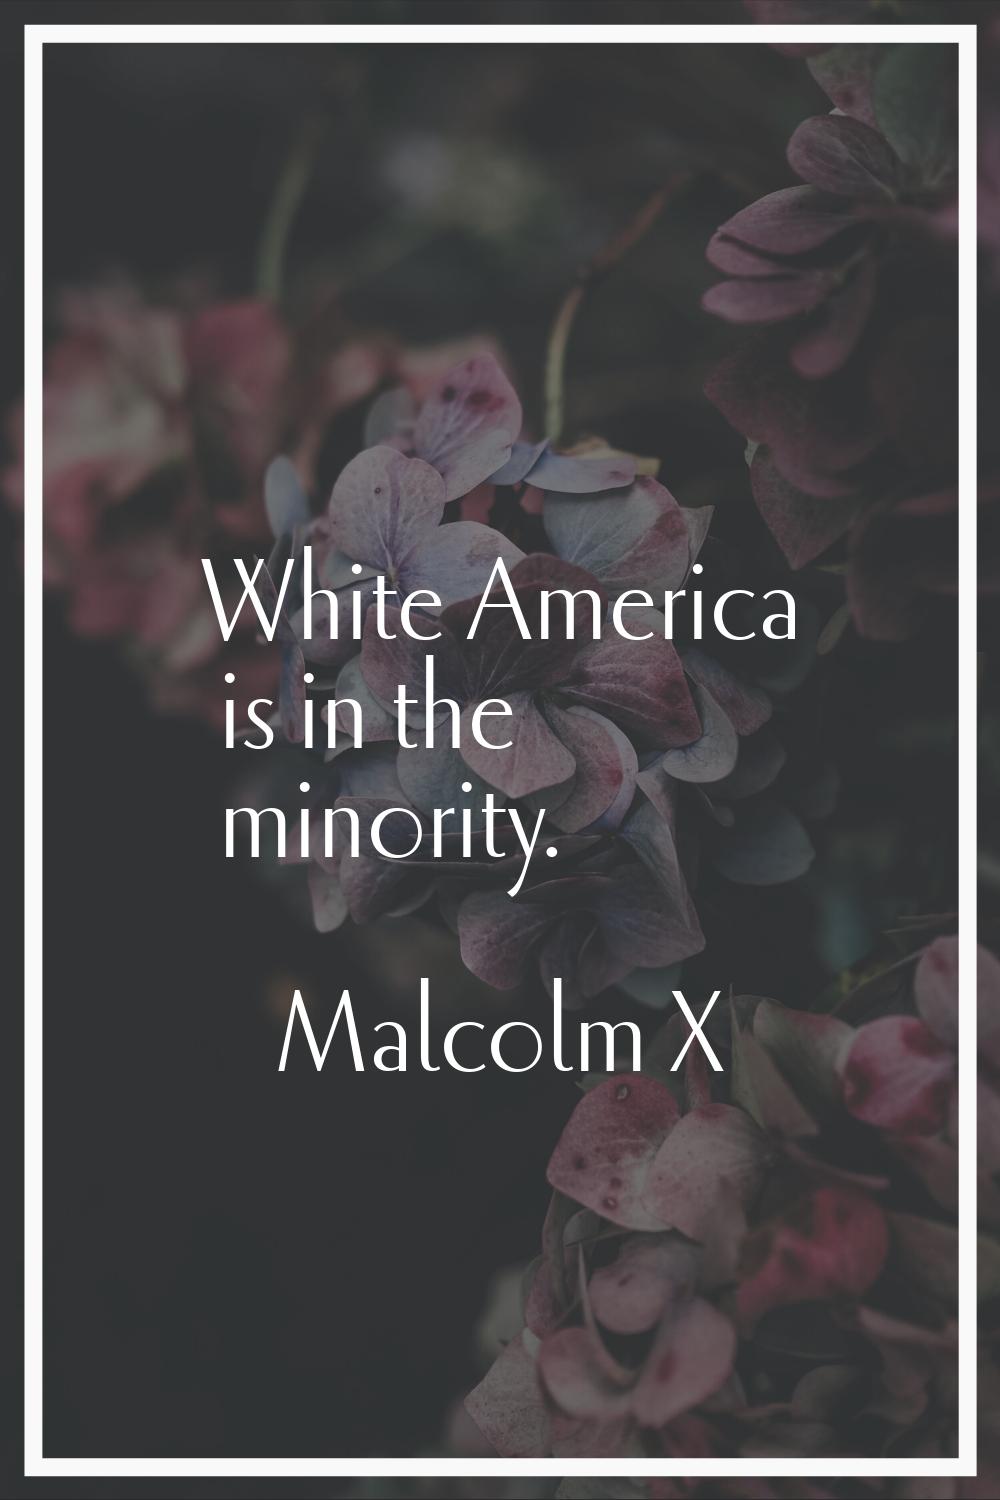 White America is in the minority.